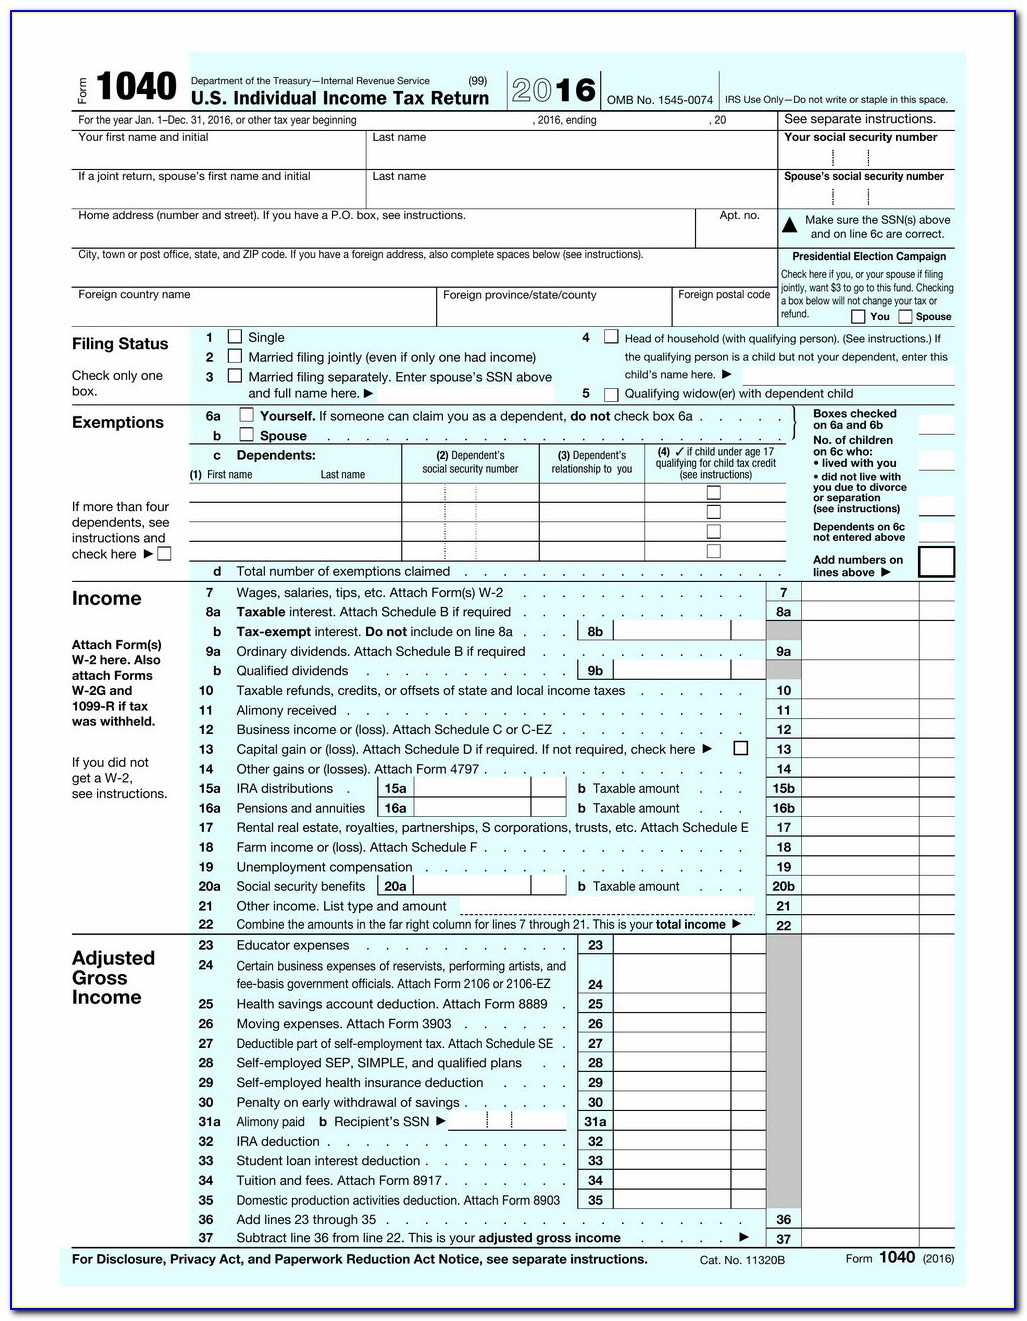 1099 Int Form From Irs